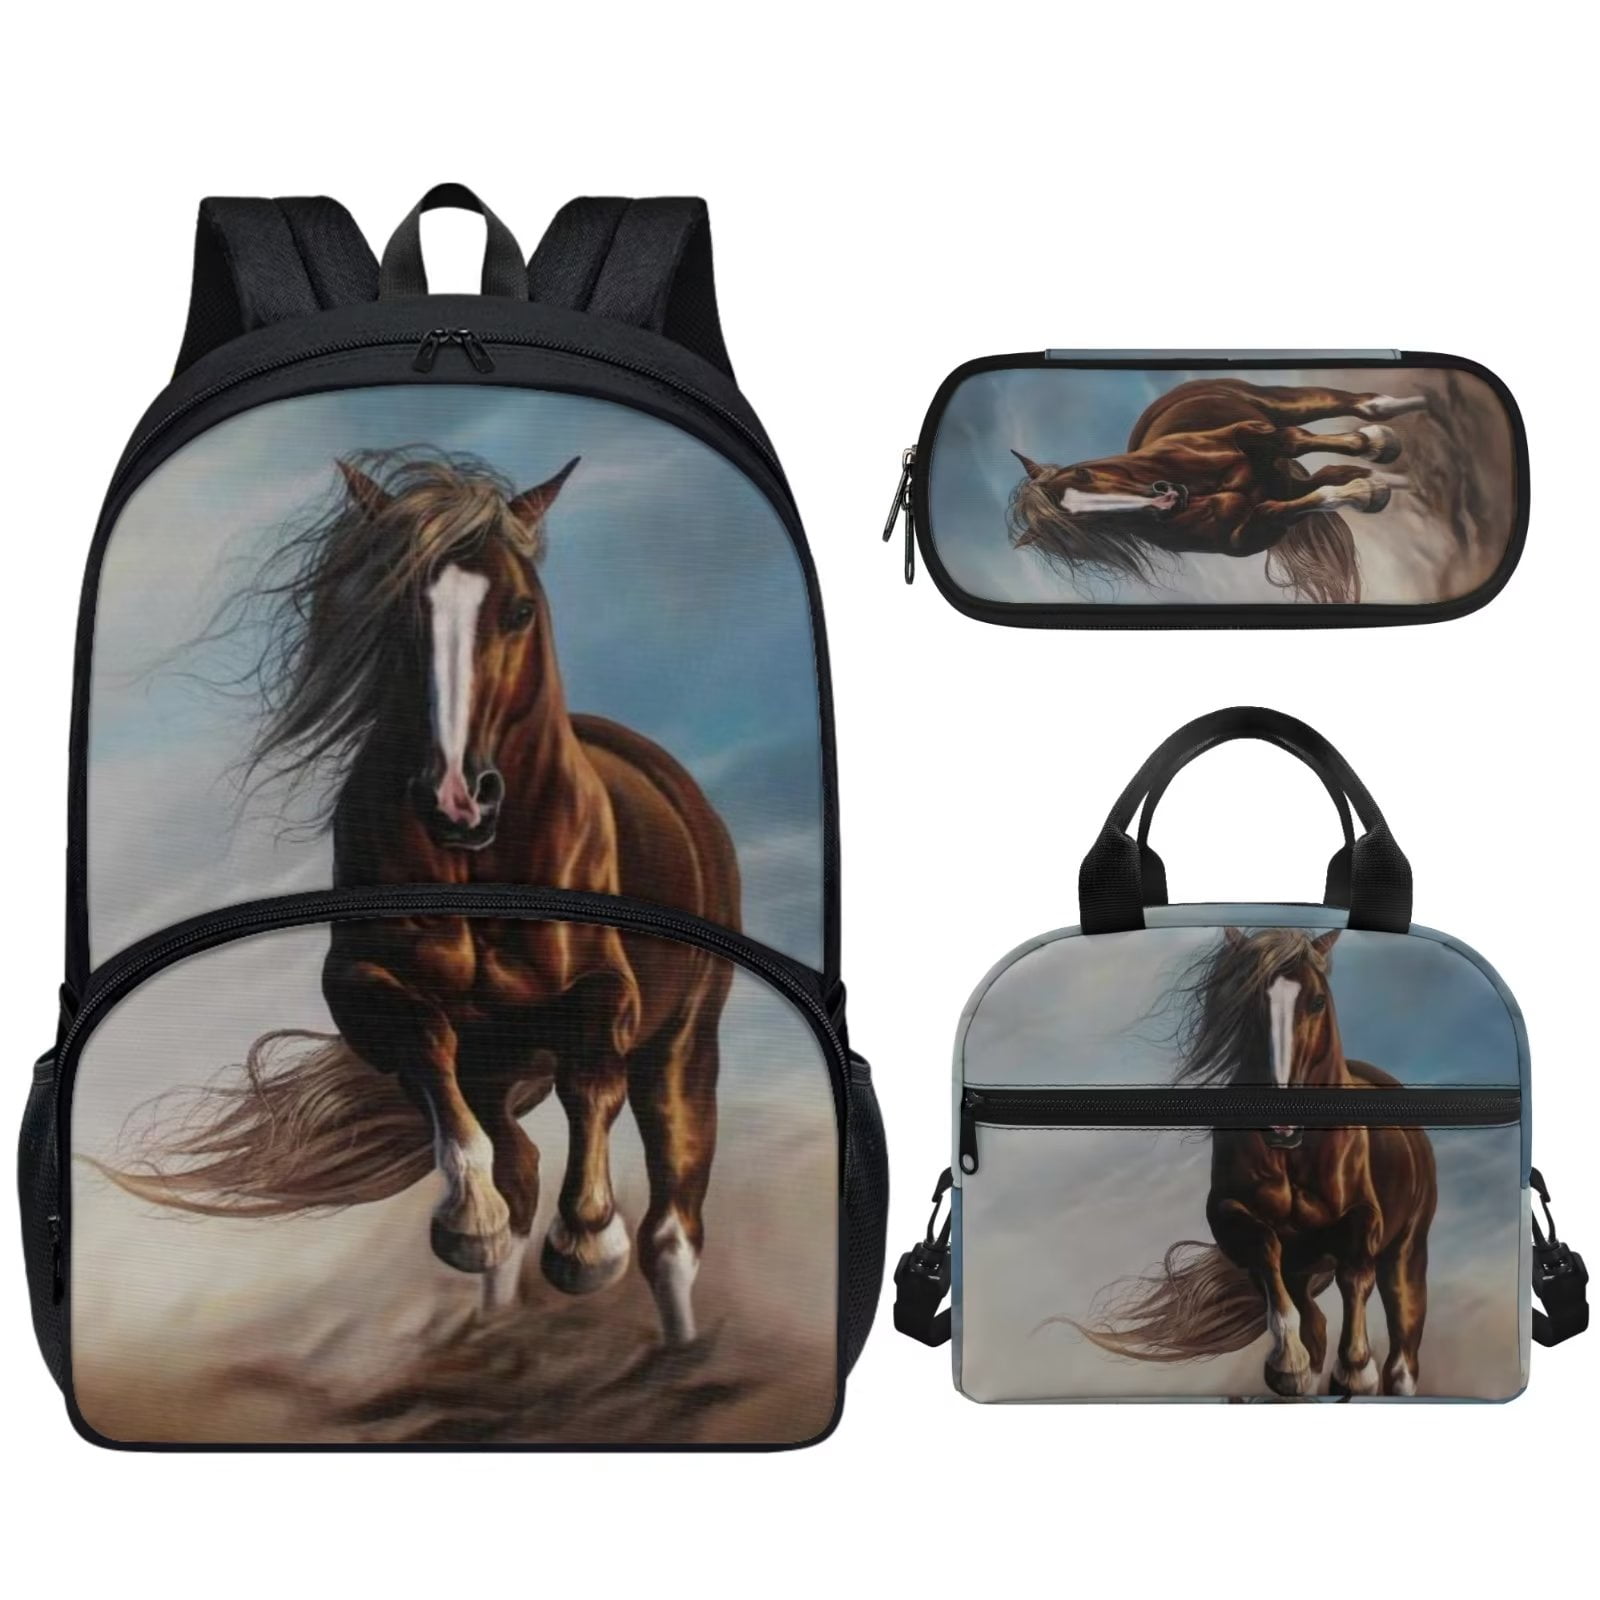 Renewold Western Horse School Bag Set with Lunch Box and Pencil